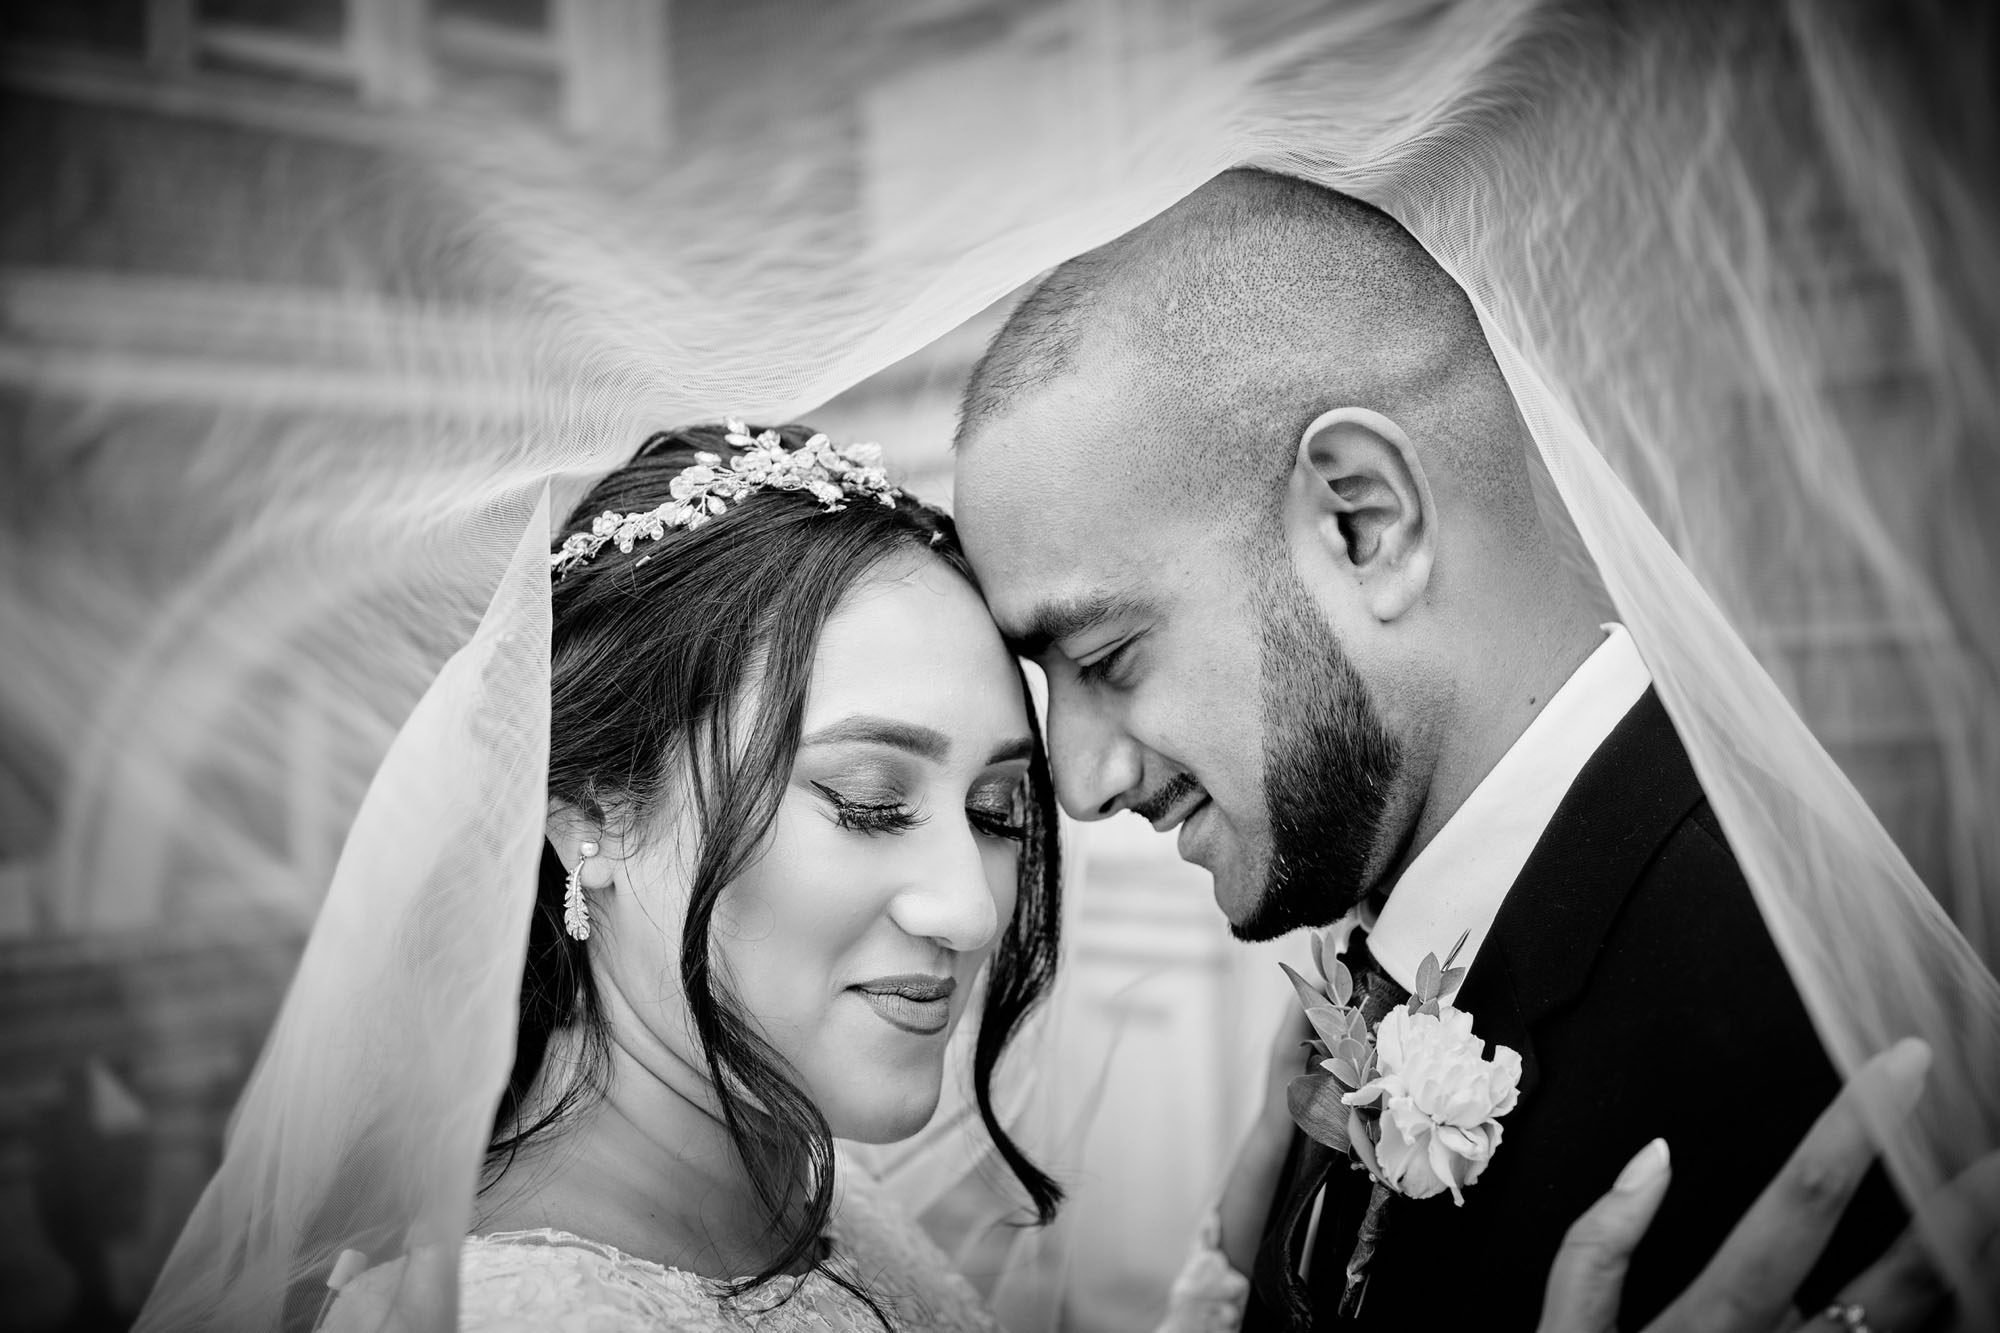 A couple photographed in black and white from beneath the wedding veil. By Howling Basset Photography